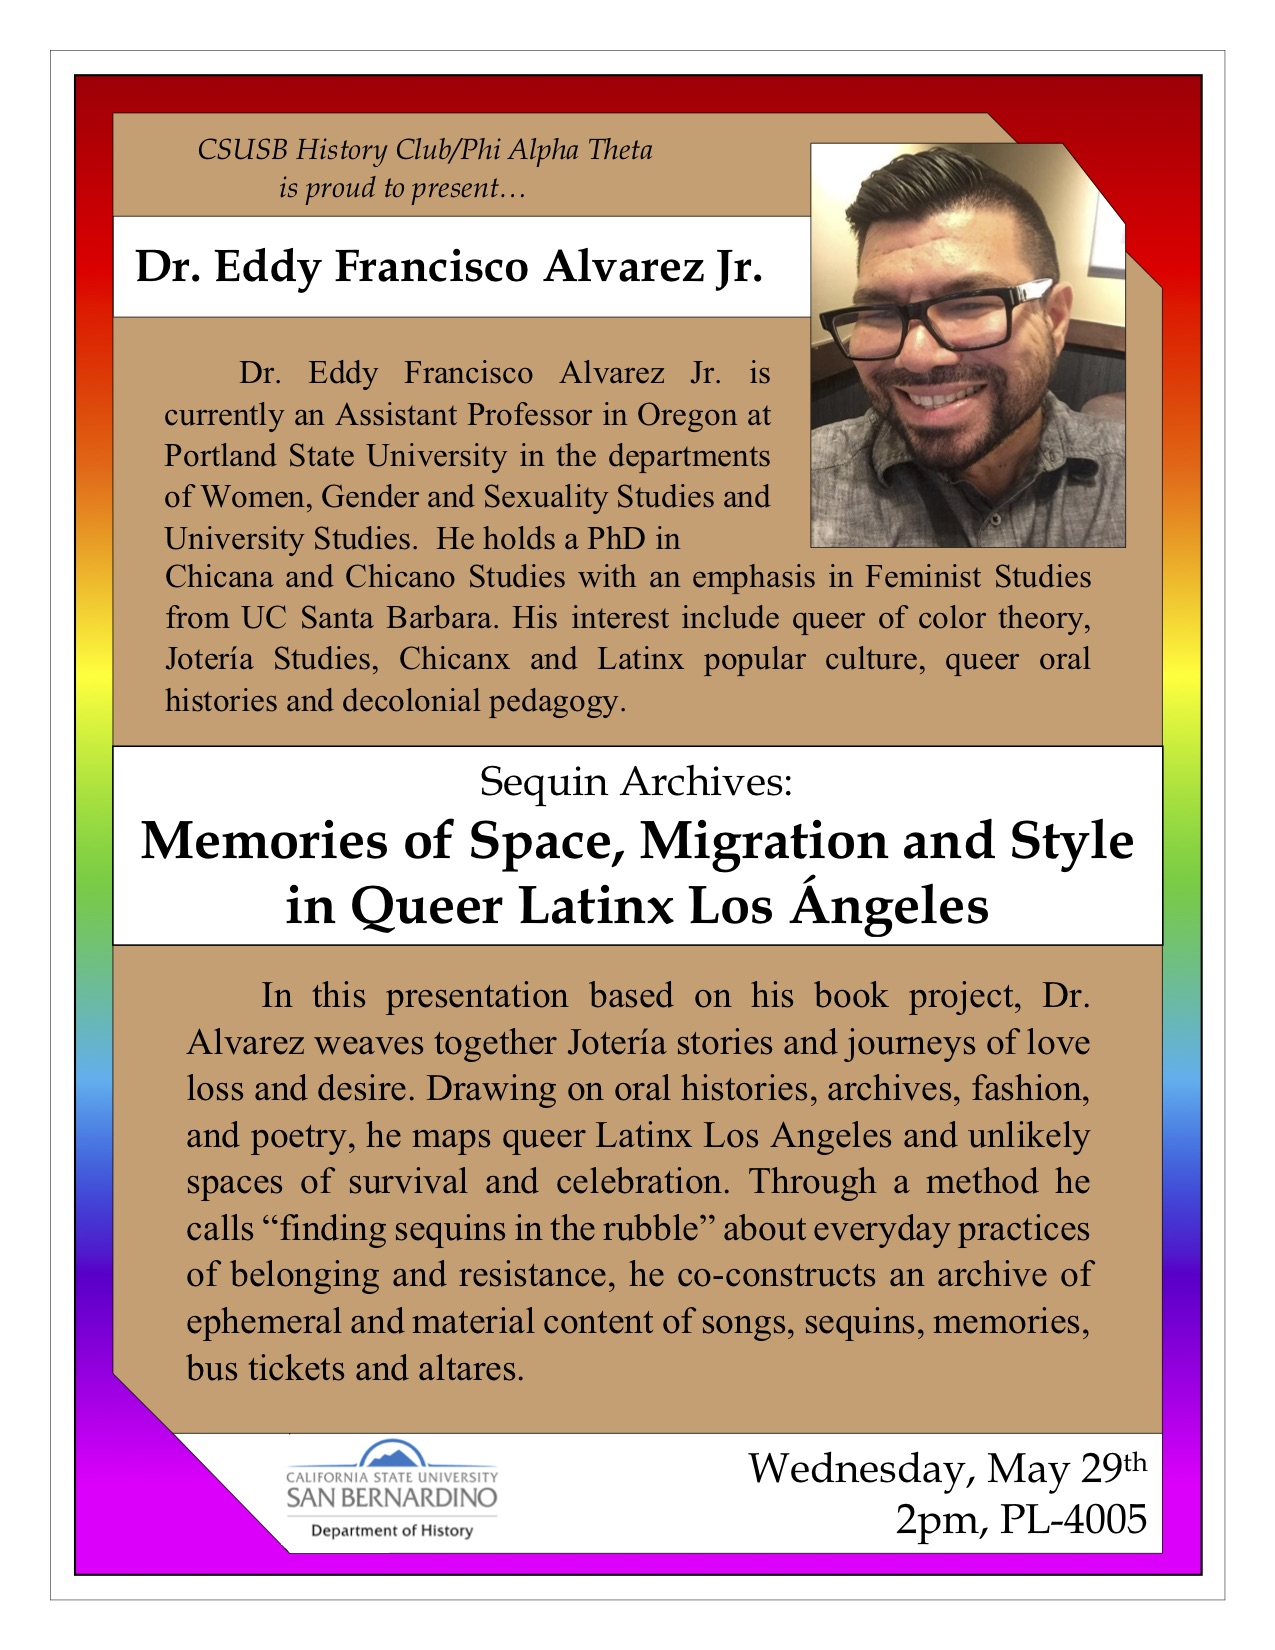 "Sequin Archives: Memories of Space, Migration, and Style in Queer Latinx Los Angeles," will be on May 29